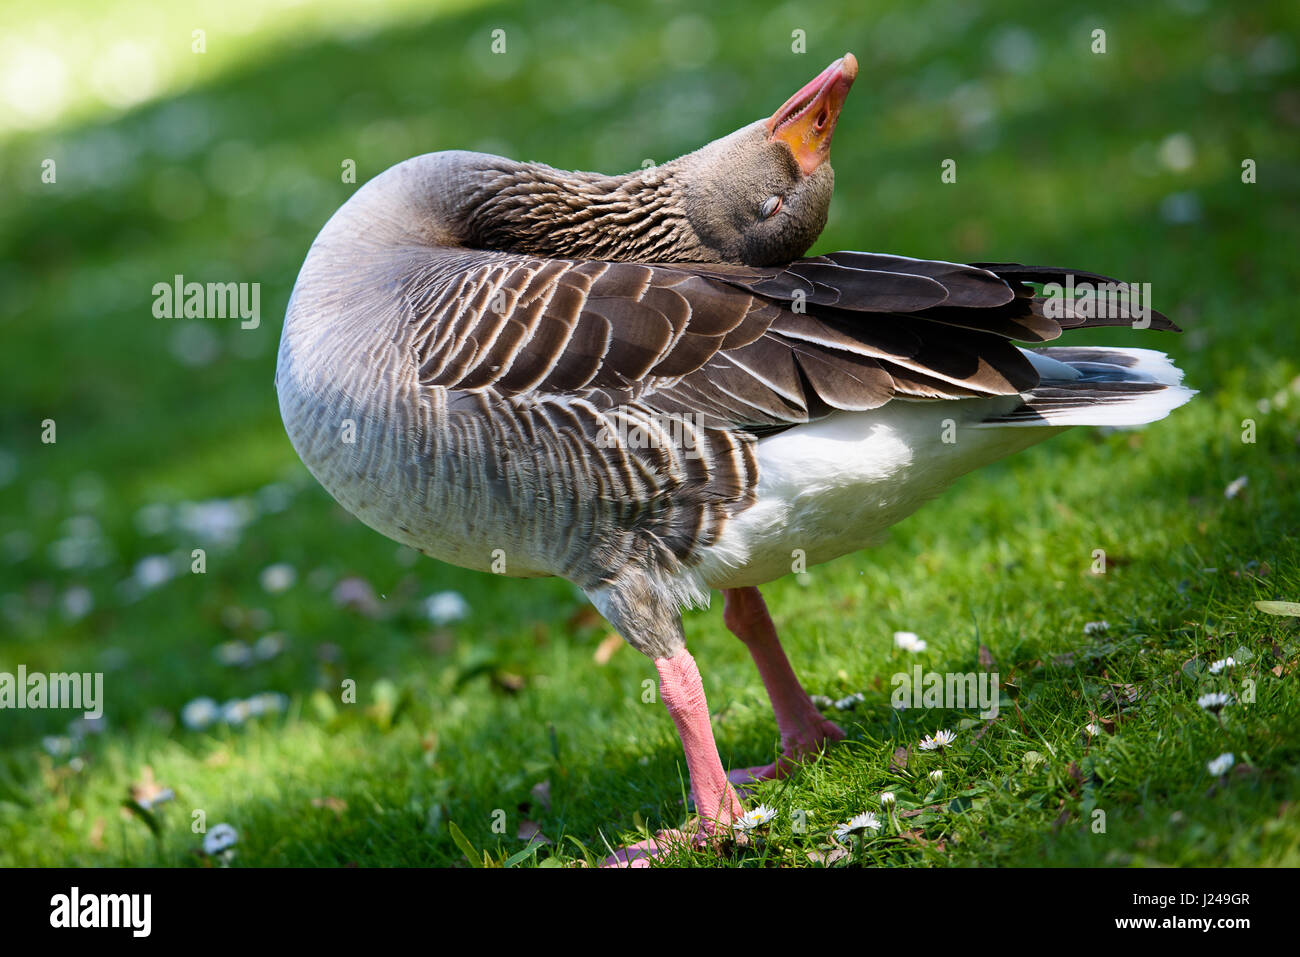 Munich, Germany. 24th Apr, 2017. A goose stretches in the English Garden in Munich, Germany, 24 April 2017. Photo: Florian Eckl/dpa/Alamy Live News Stock Photo